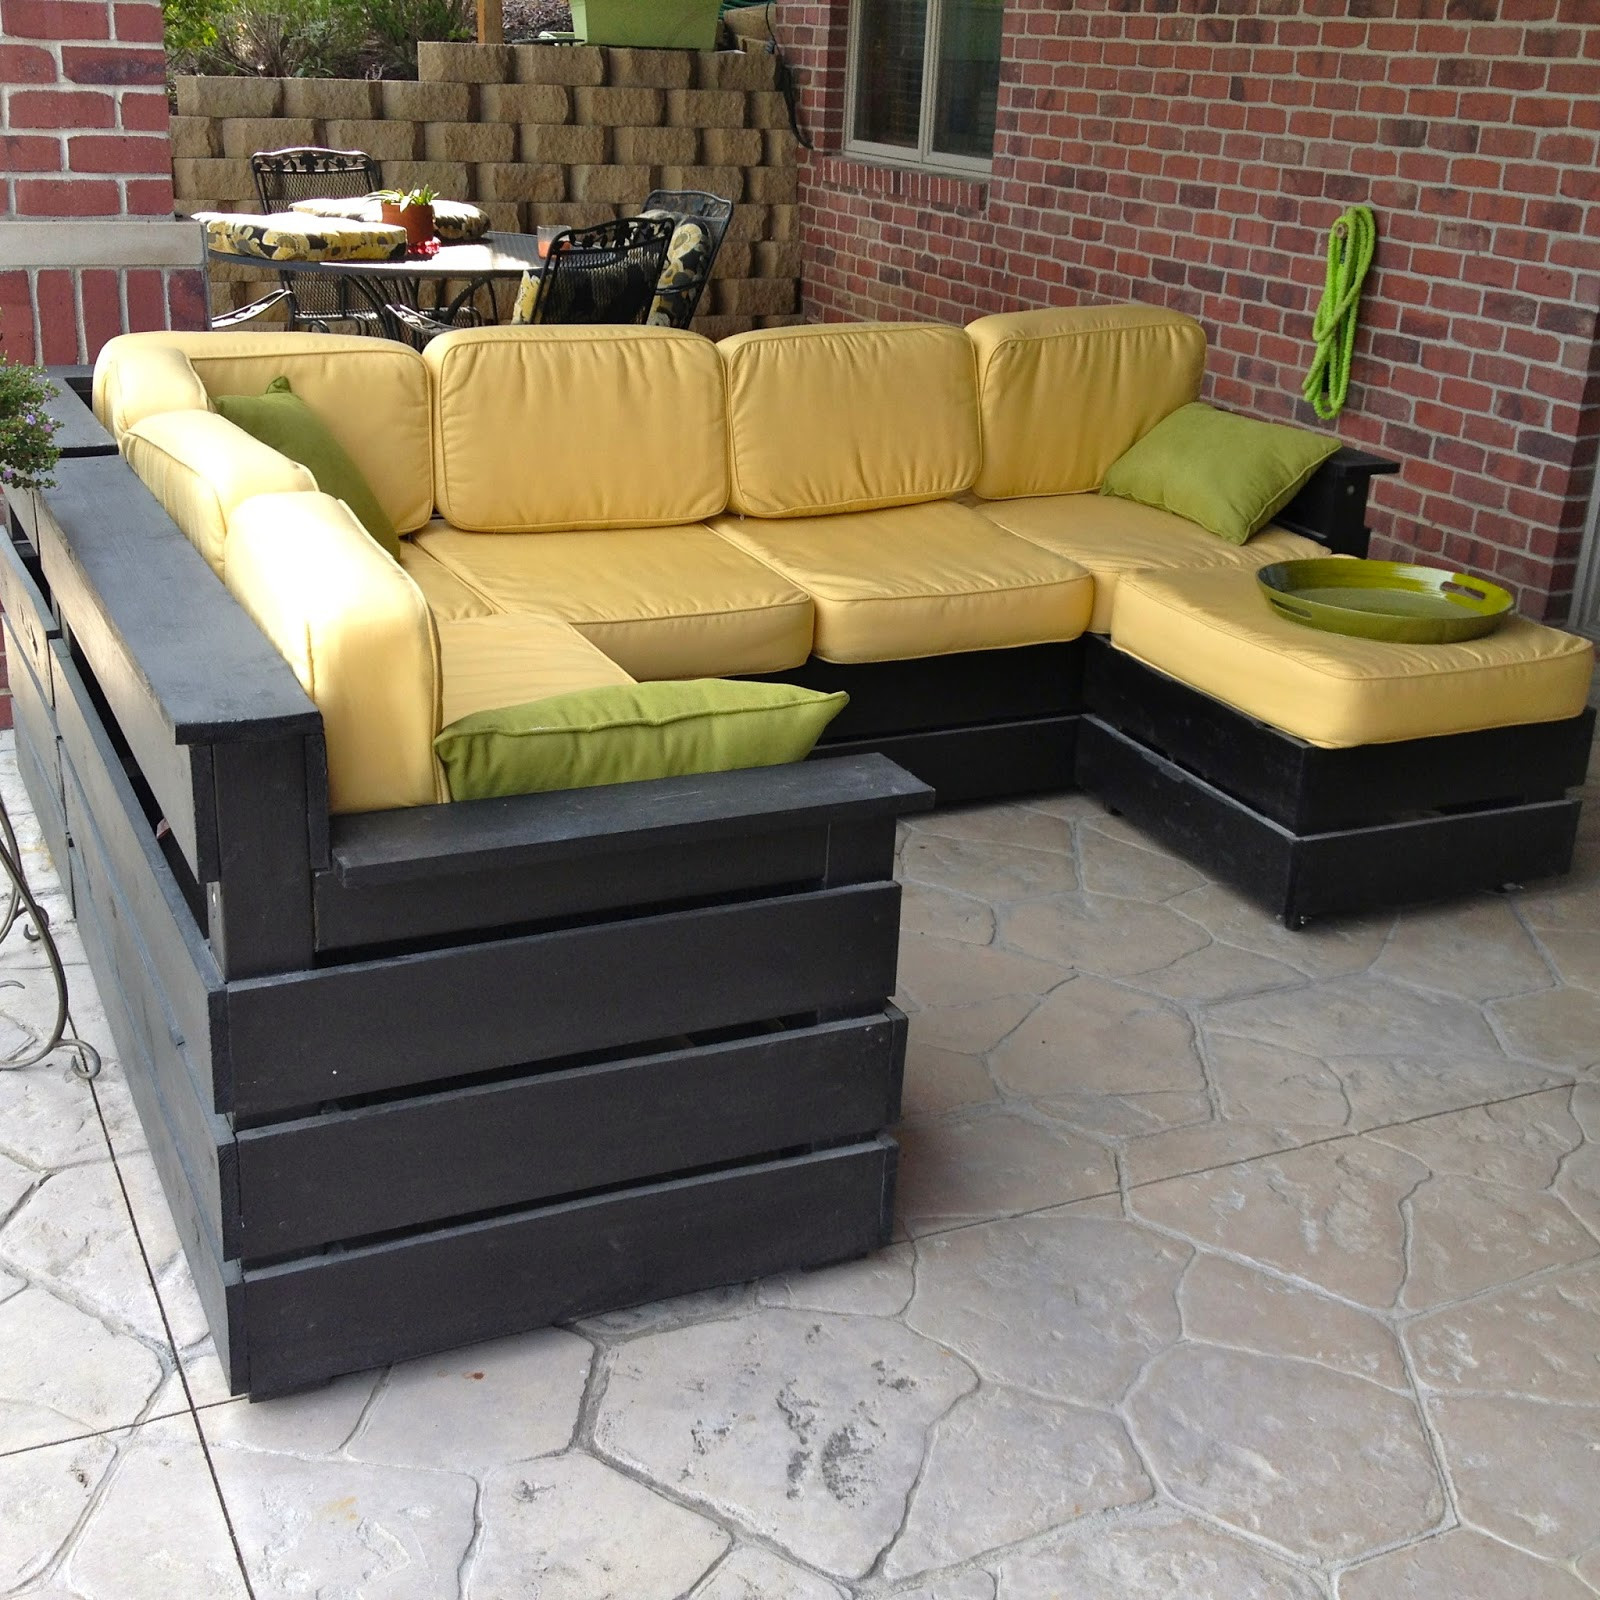 DIY Outdoor Furniture
 DIY Why Spend More DIY Outdoor Sectional